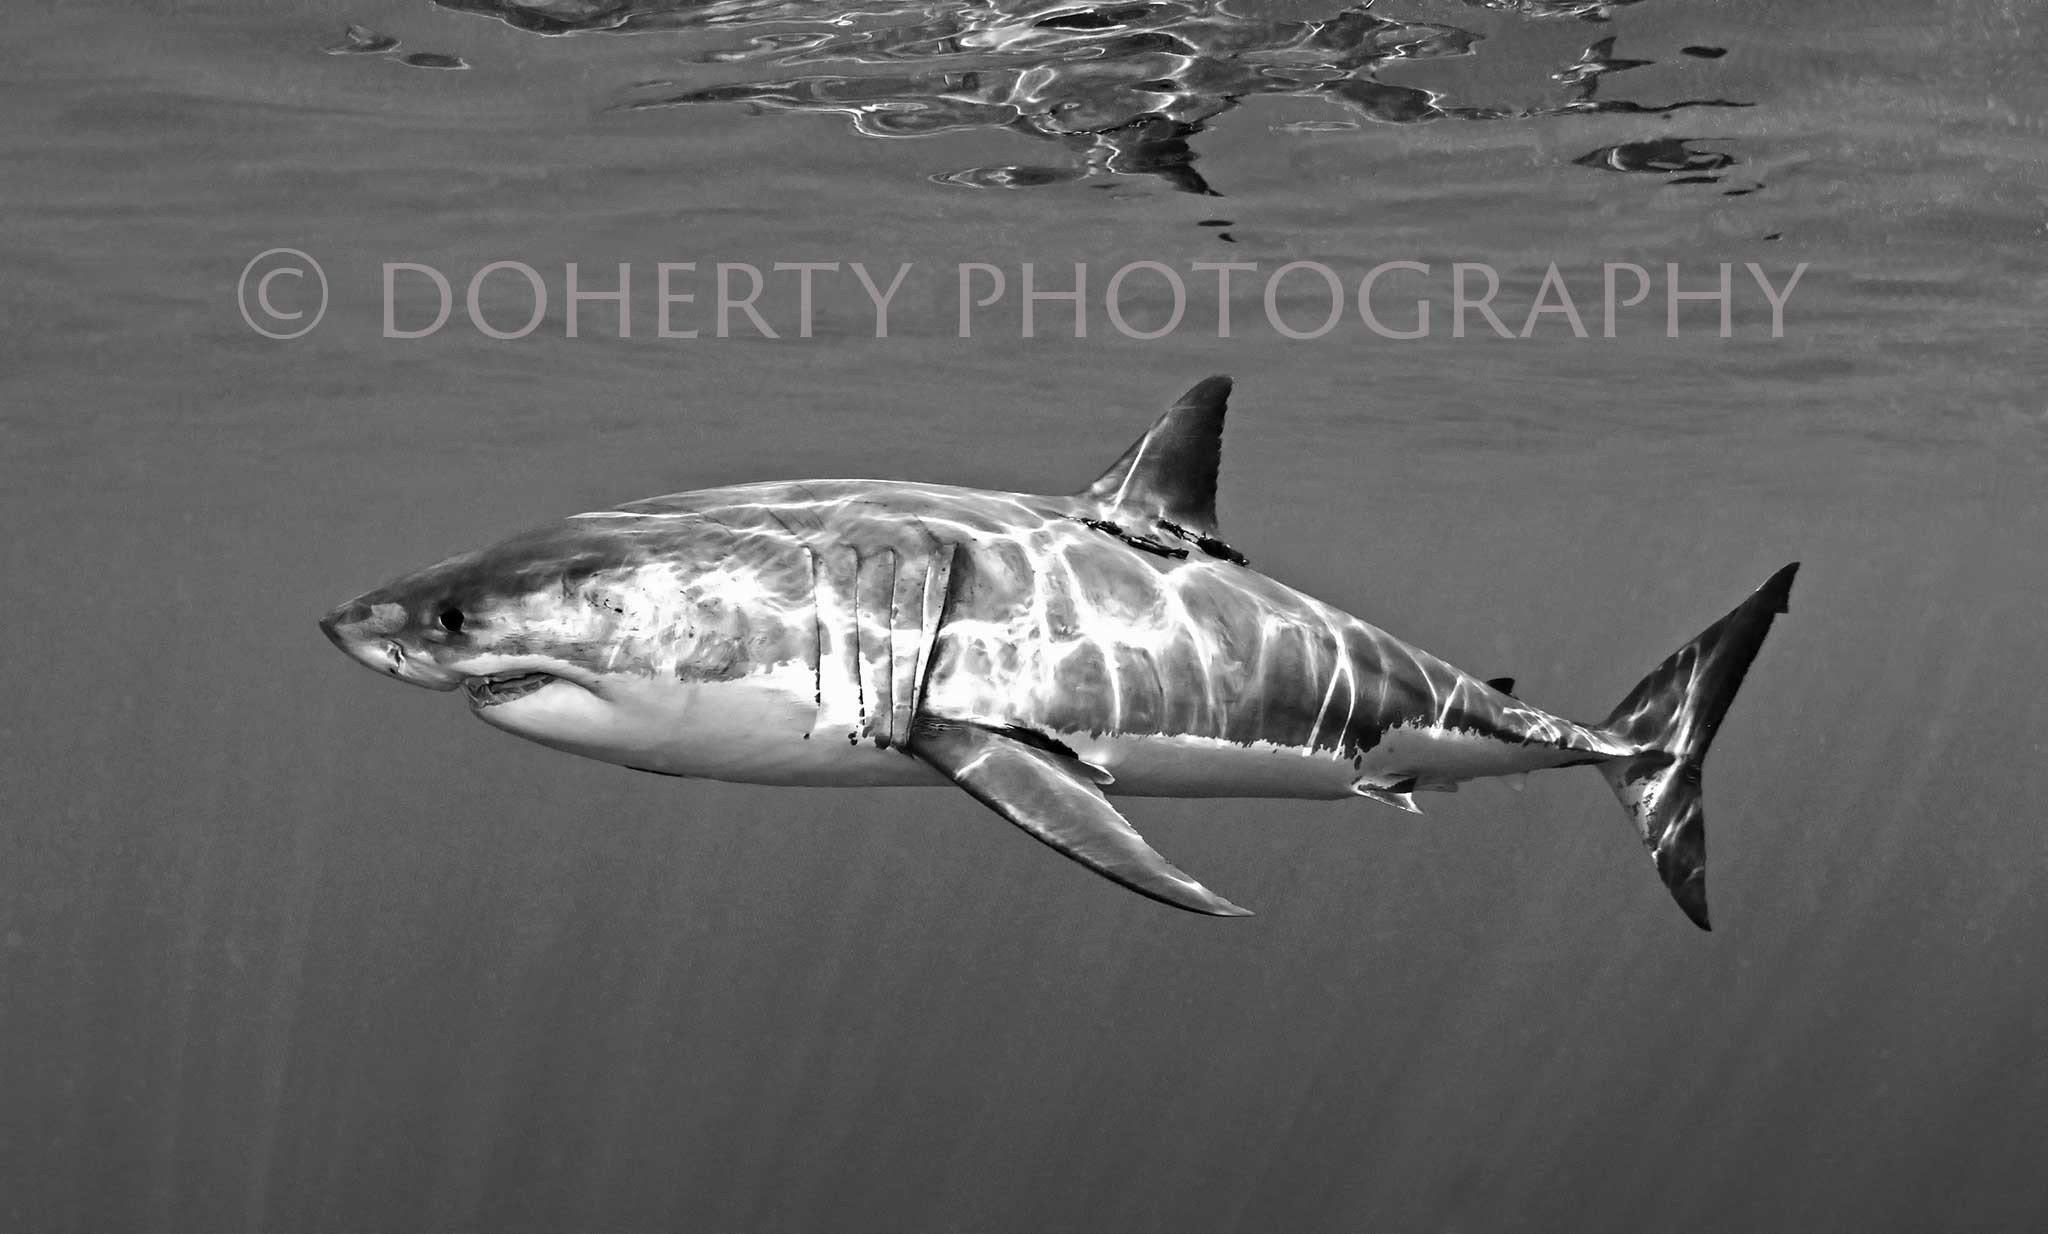 Shark black and white great black and white shark guadalupe mexico doherty